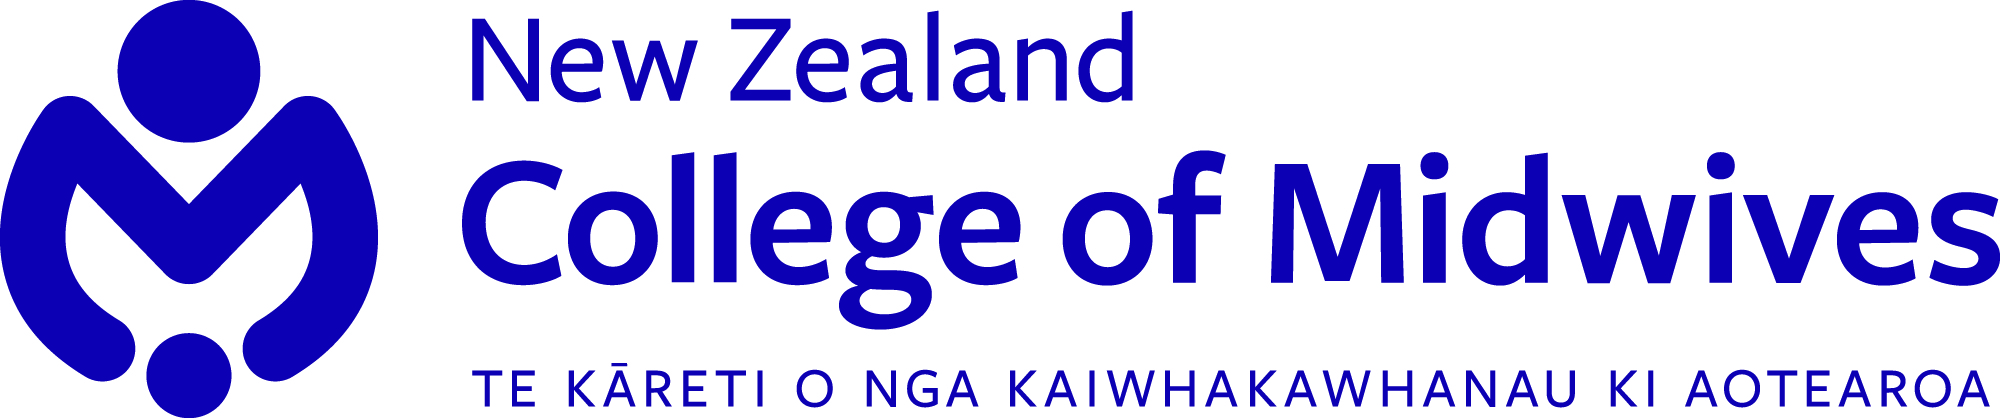 New Zealand College of Midwives